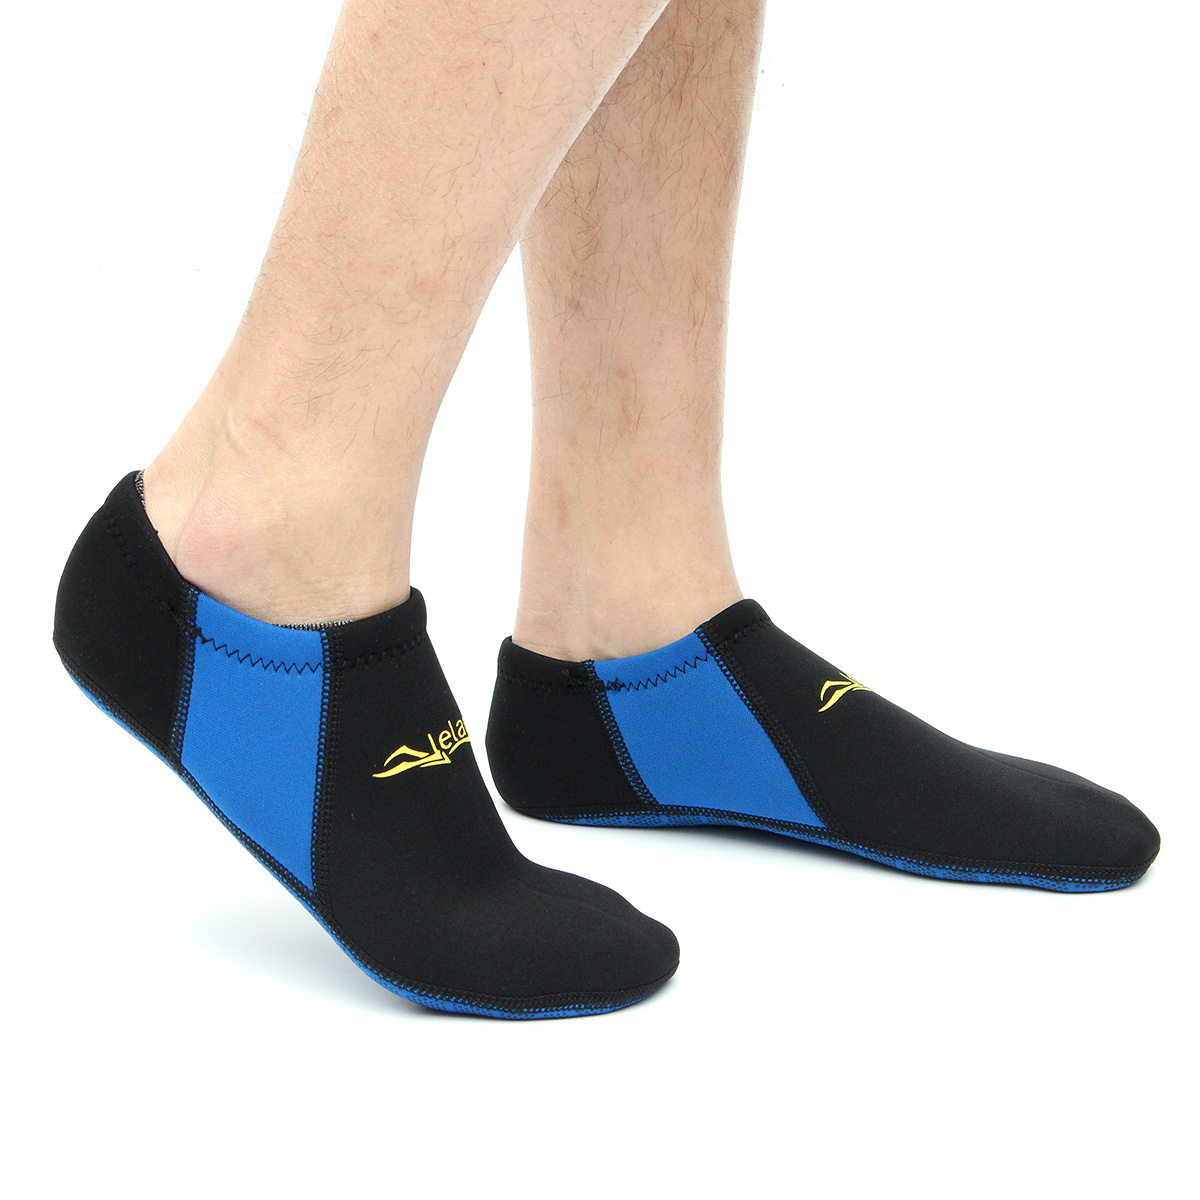 Outdoor-Swimming-Snorkel-Socks-Soft-Beach-Shoes-Water-Sport-Scuba-Surf-Diving-1130872-11